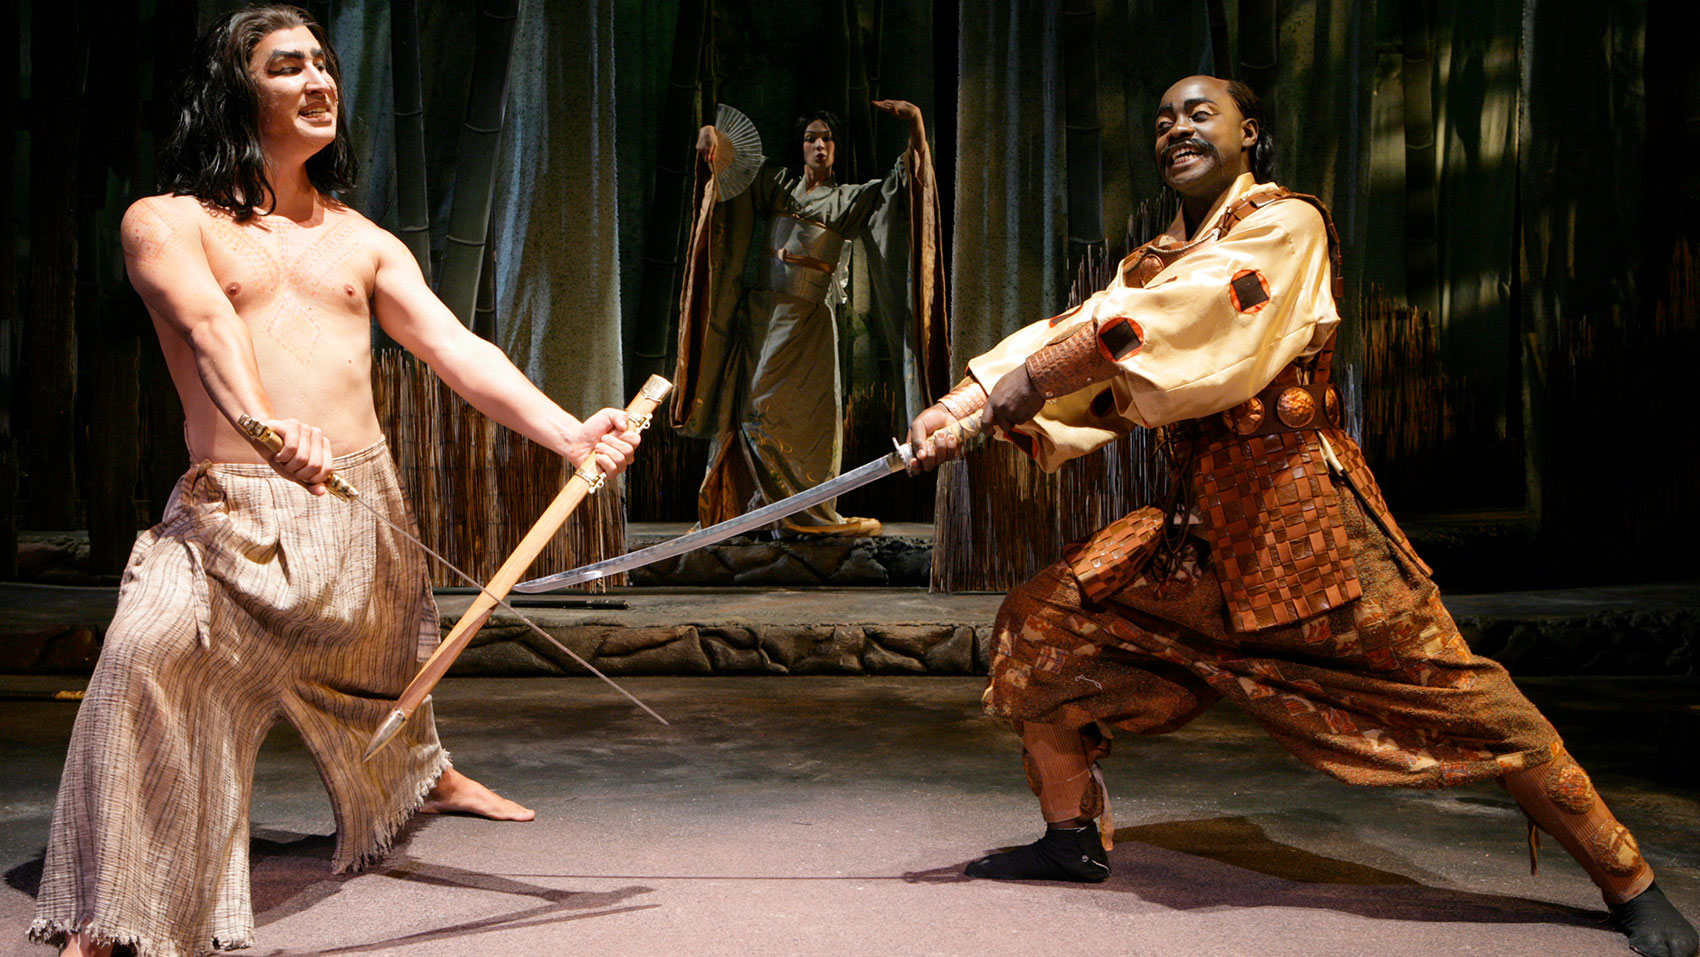 Two men are lunging outward, bodies positioned toward the audience, yet they are looking at each other with wide eyes and bared teeth. The man on the left holds two sharpened wooden sticks with metal points in each hand while the man on the right wields a sword. A woman poses behind them in the background- she wears formal, floral attire with gold accents while holding an open fan held high in her right hand positioned toward her face while she raises her left arm and her palm parallel to the ceiling. She has a look of attitude on her face. 